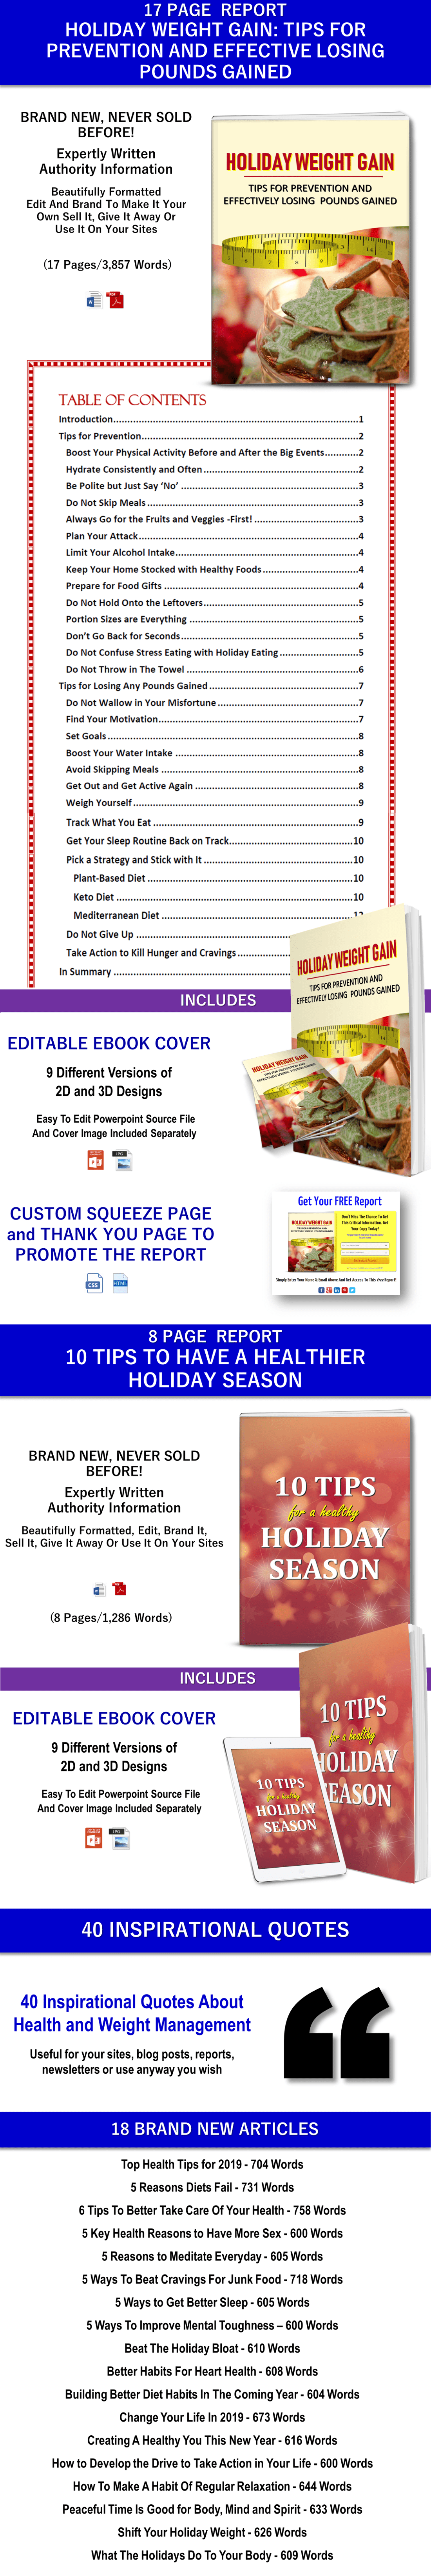 Holiday Health and Weight Management PLR